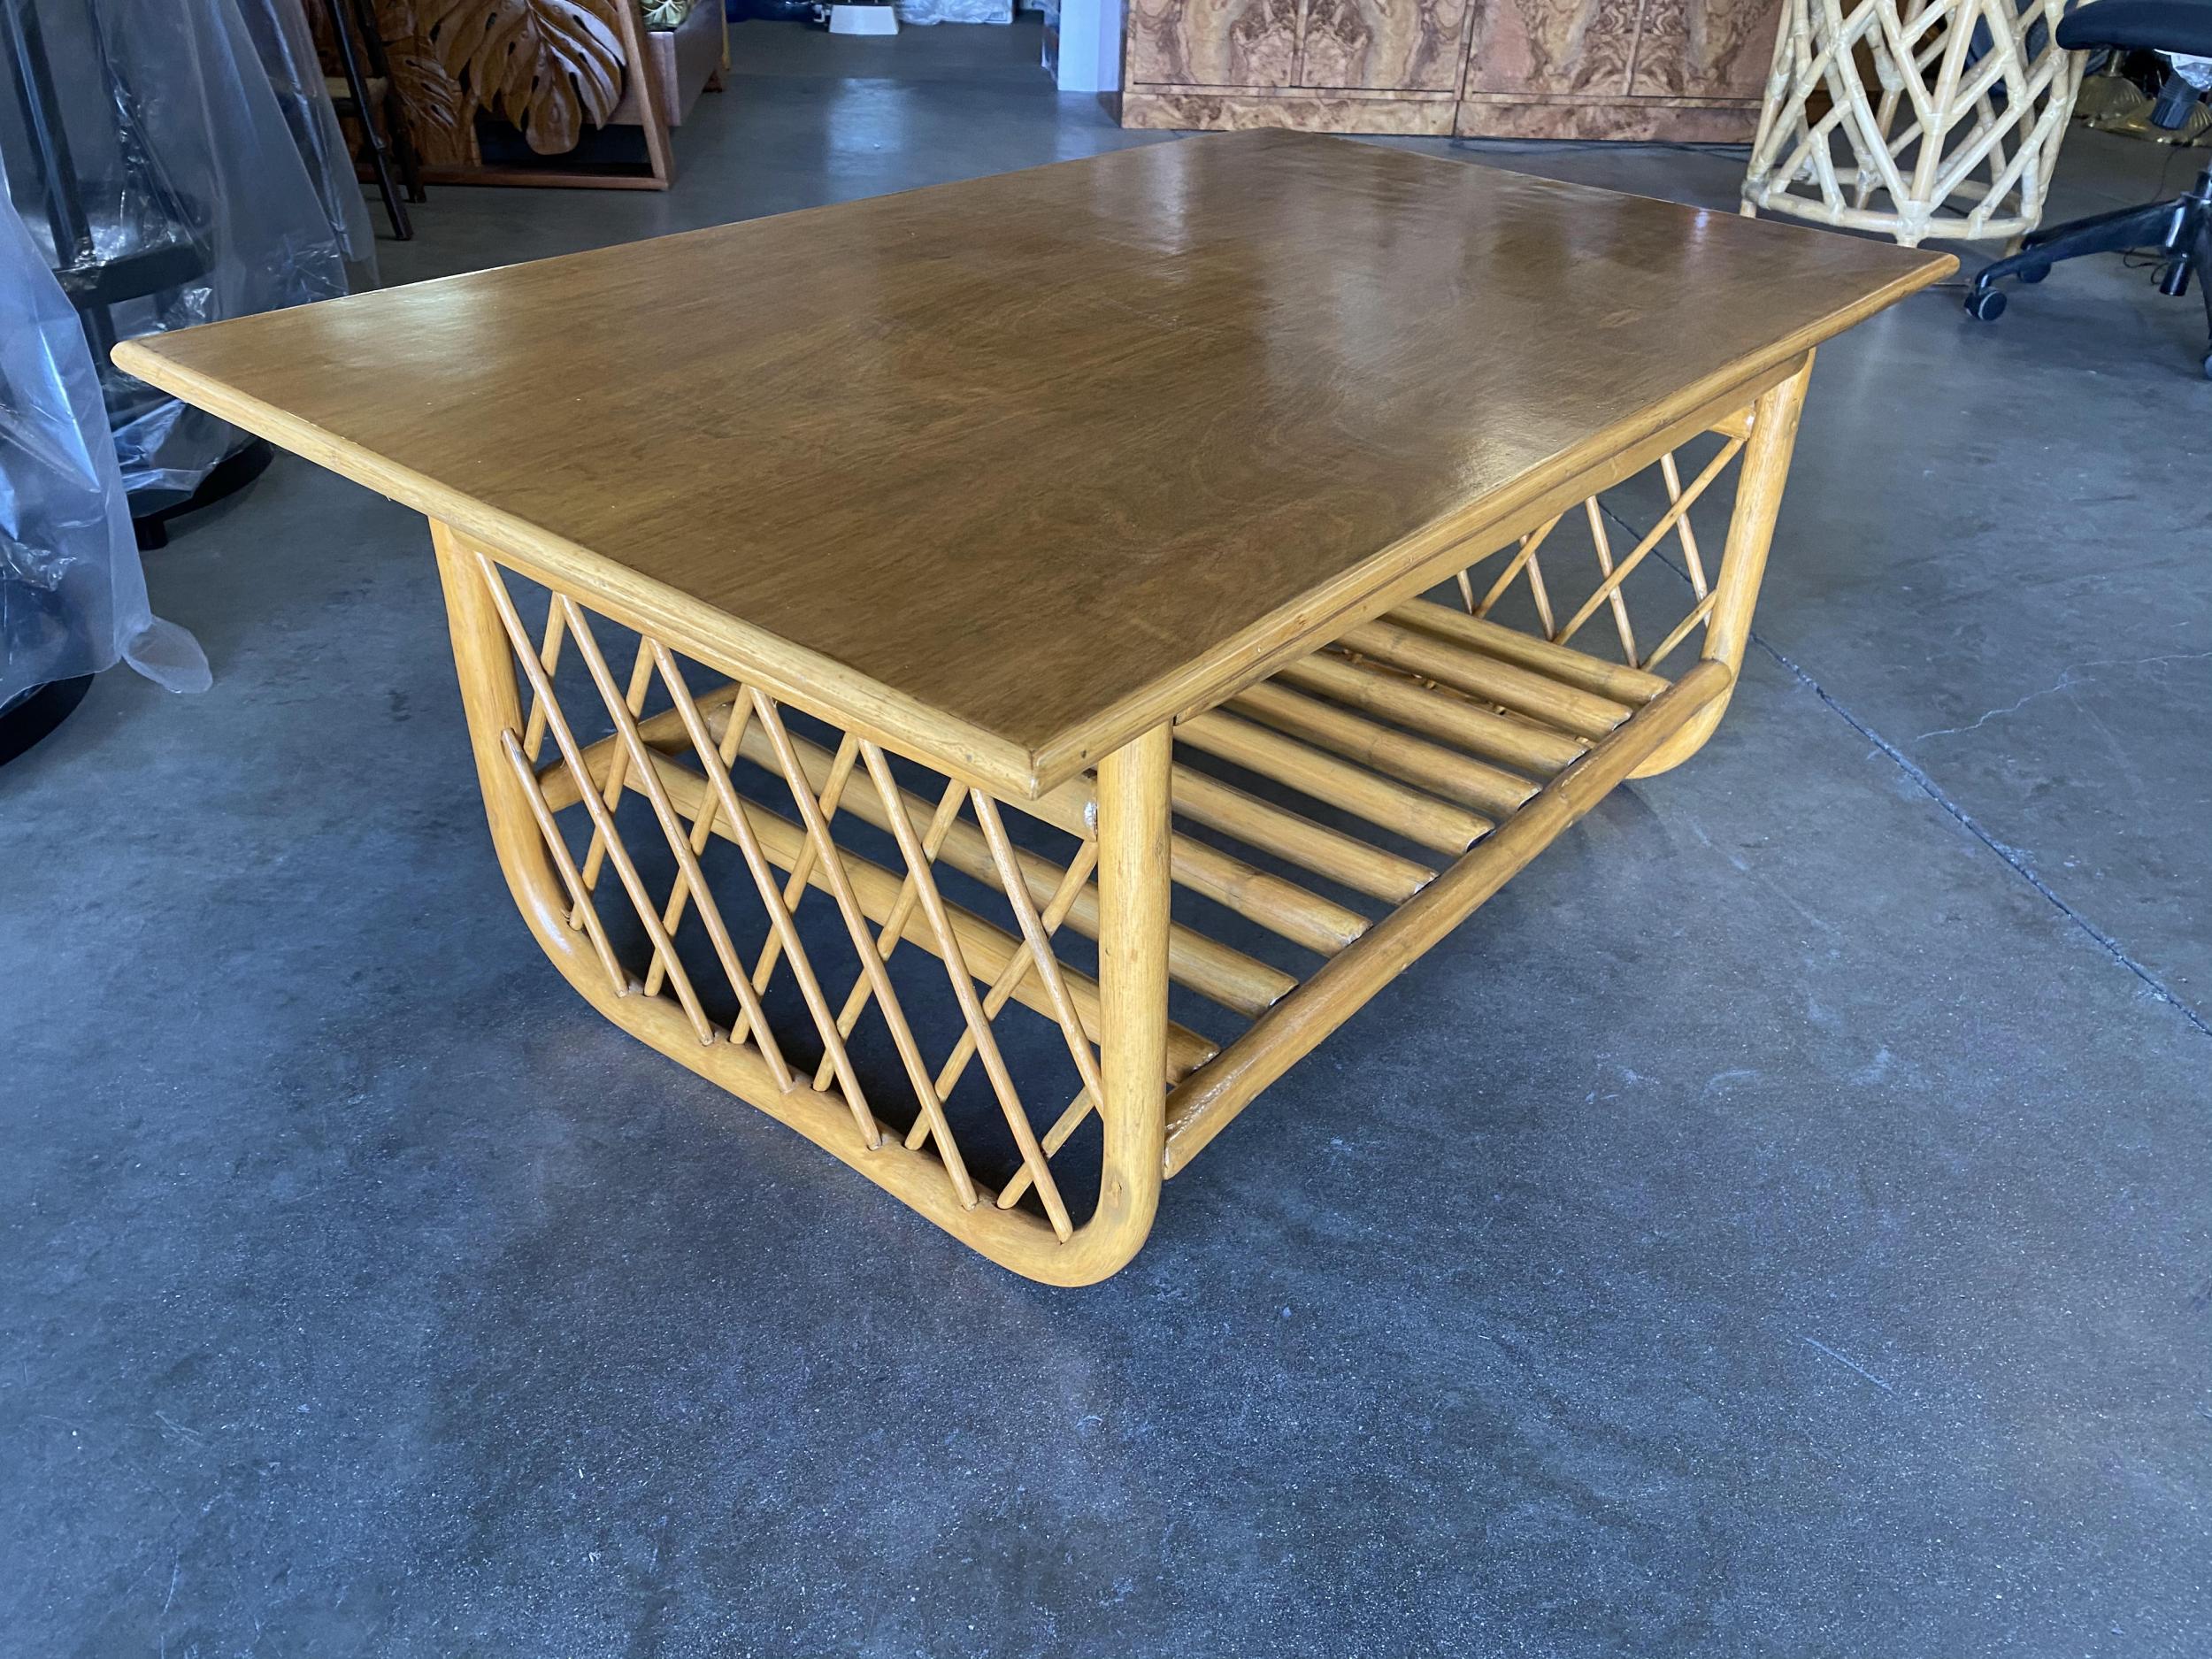 This minimal yet elegant coffee table features two side panels of diamond links with a U shaped based. The table features a mahogany top and a pole rattan lower tier for storage of magazines and devices.

Size: Large 41.5